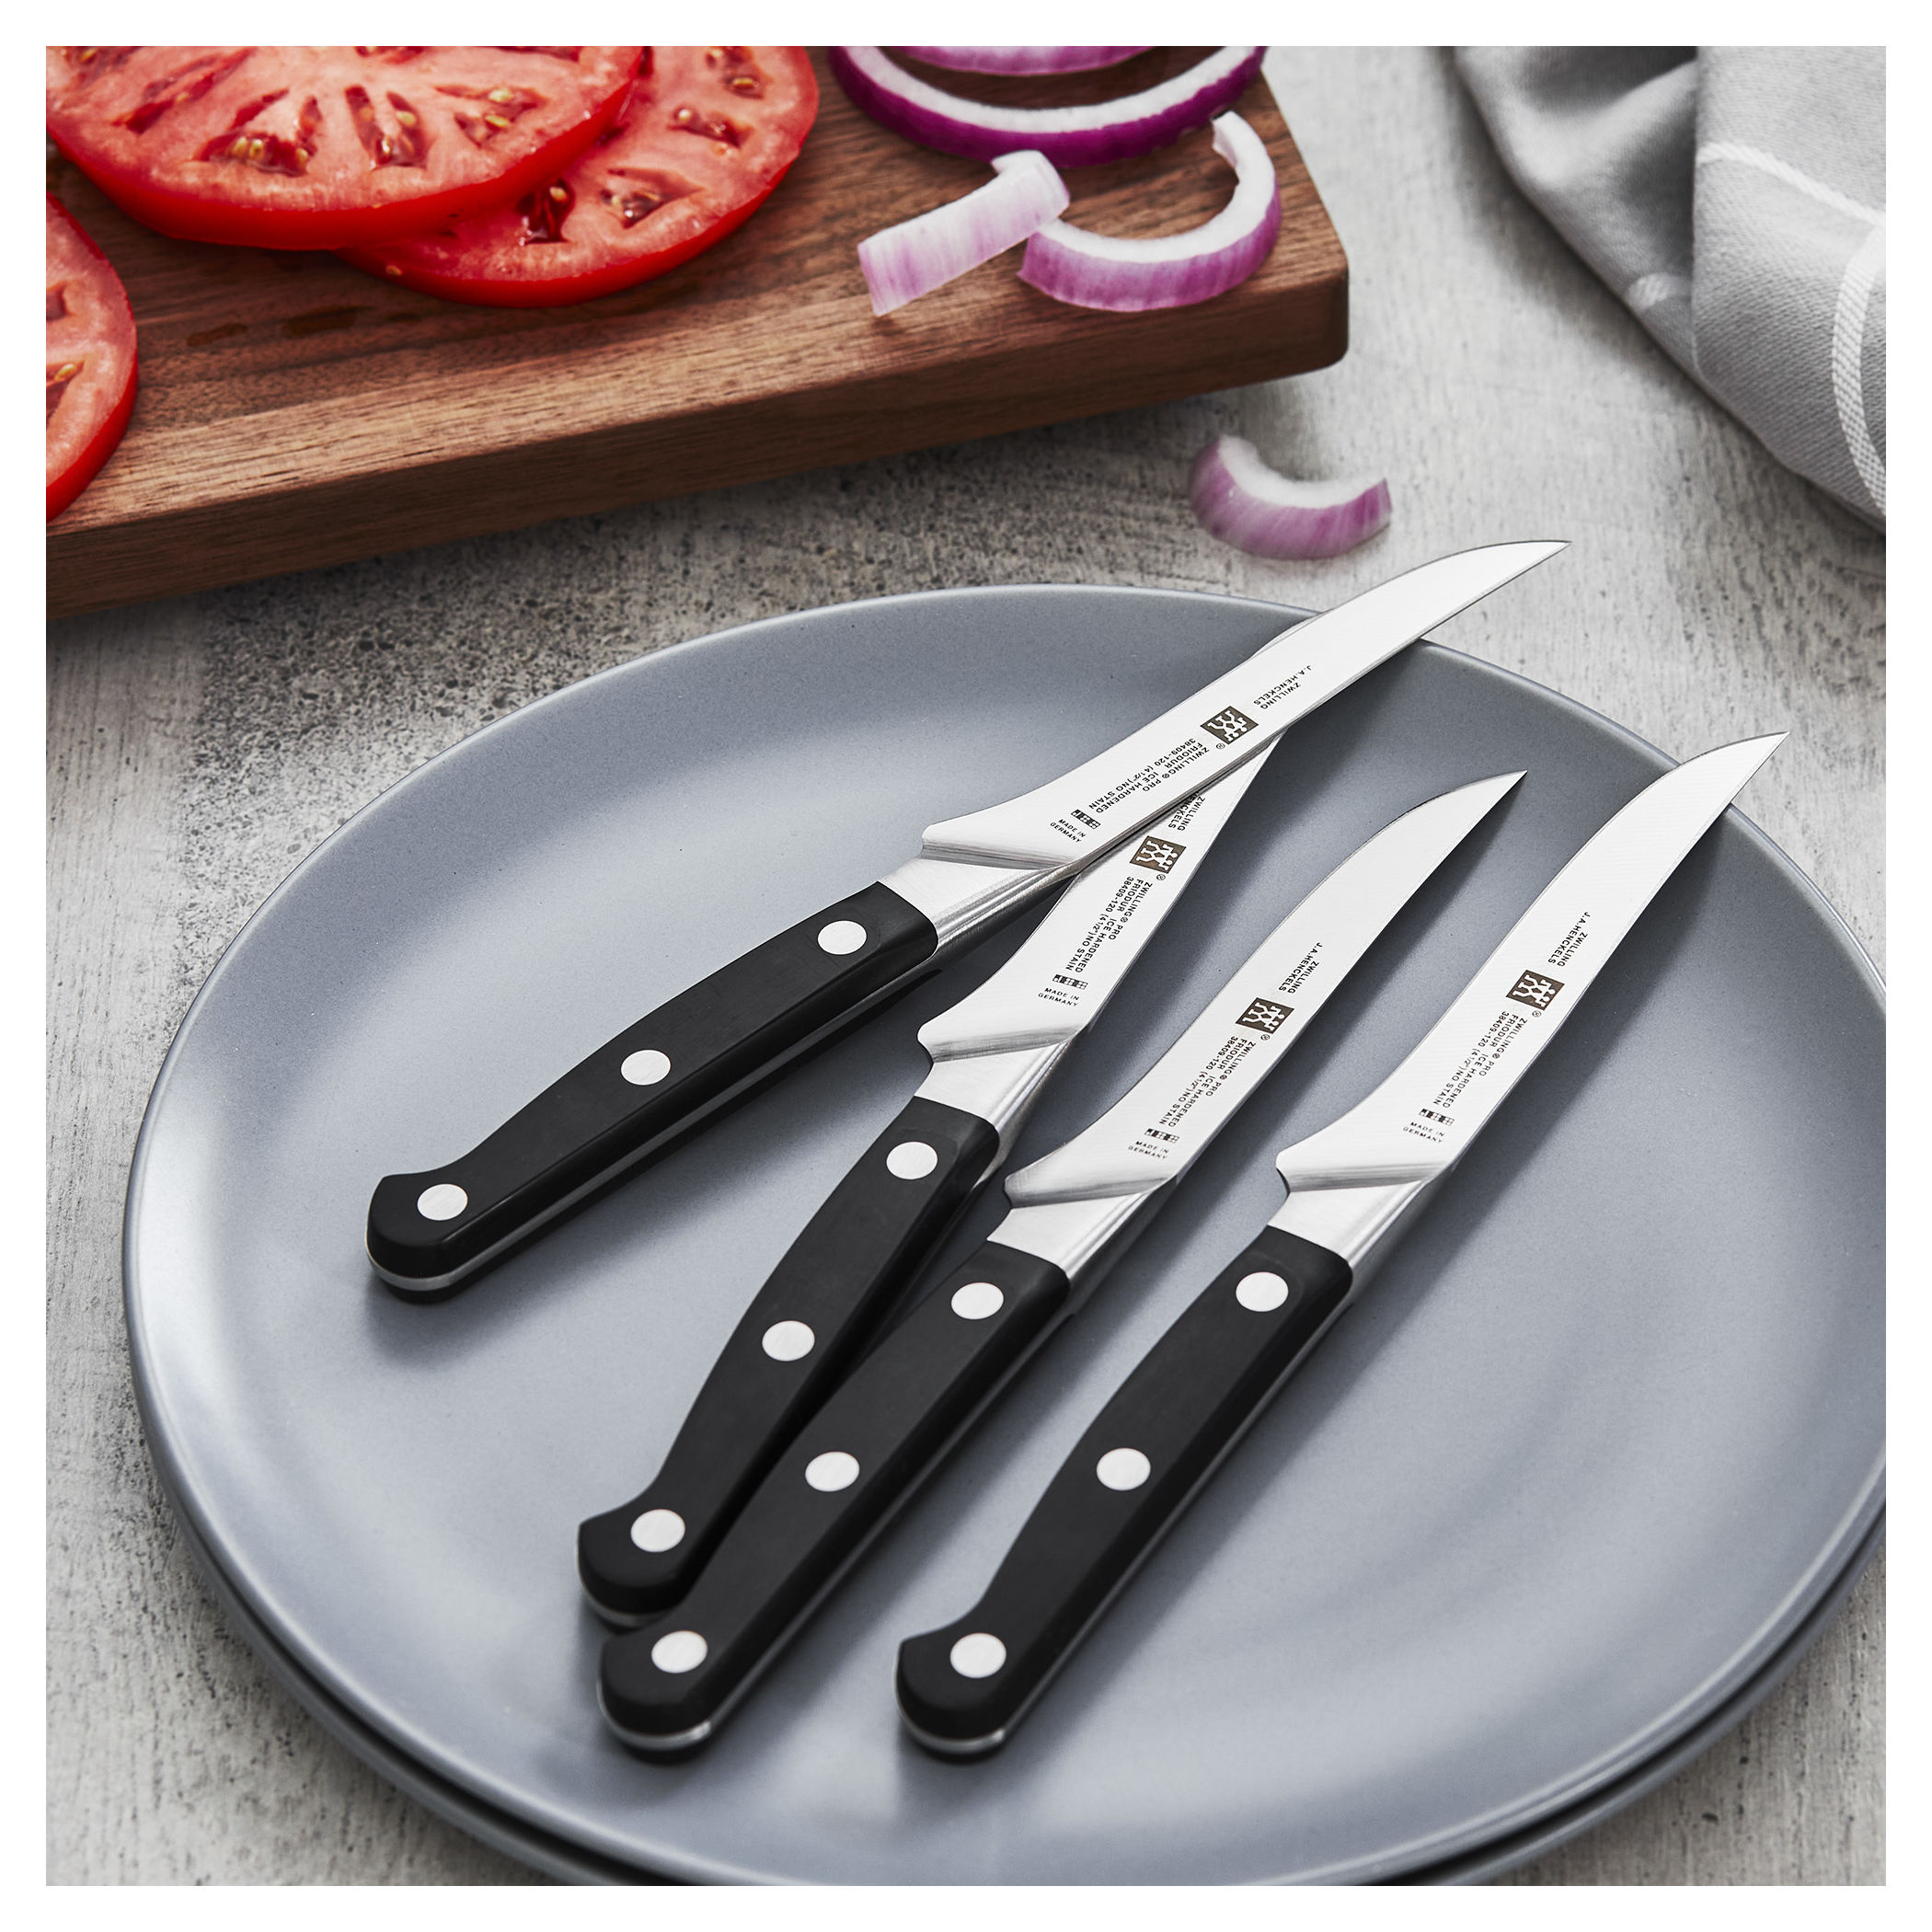 Tuesday deal: Grab a $30 set of Henckels steak knives (carefully) - CNET